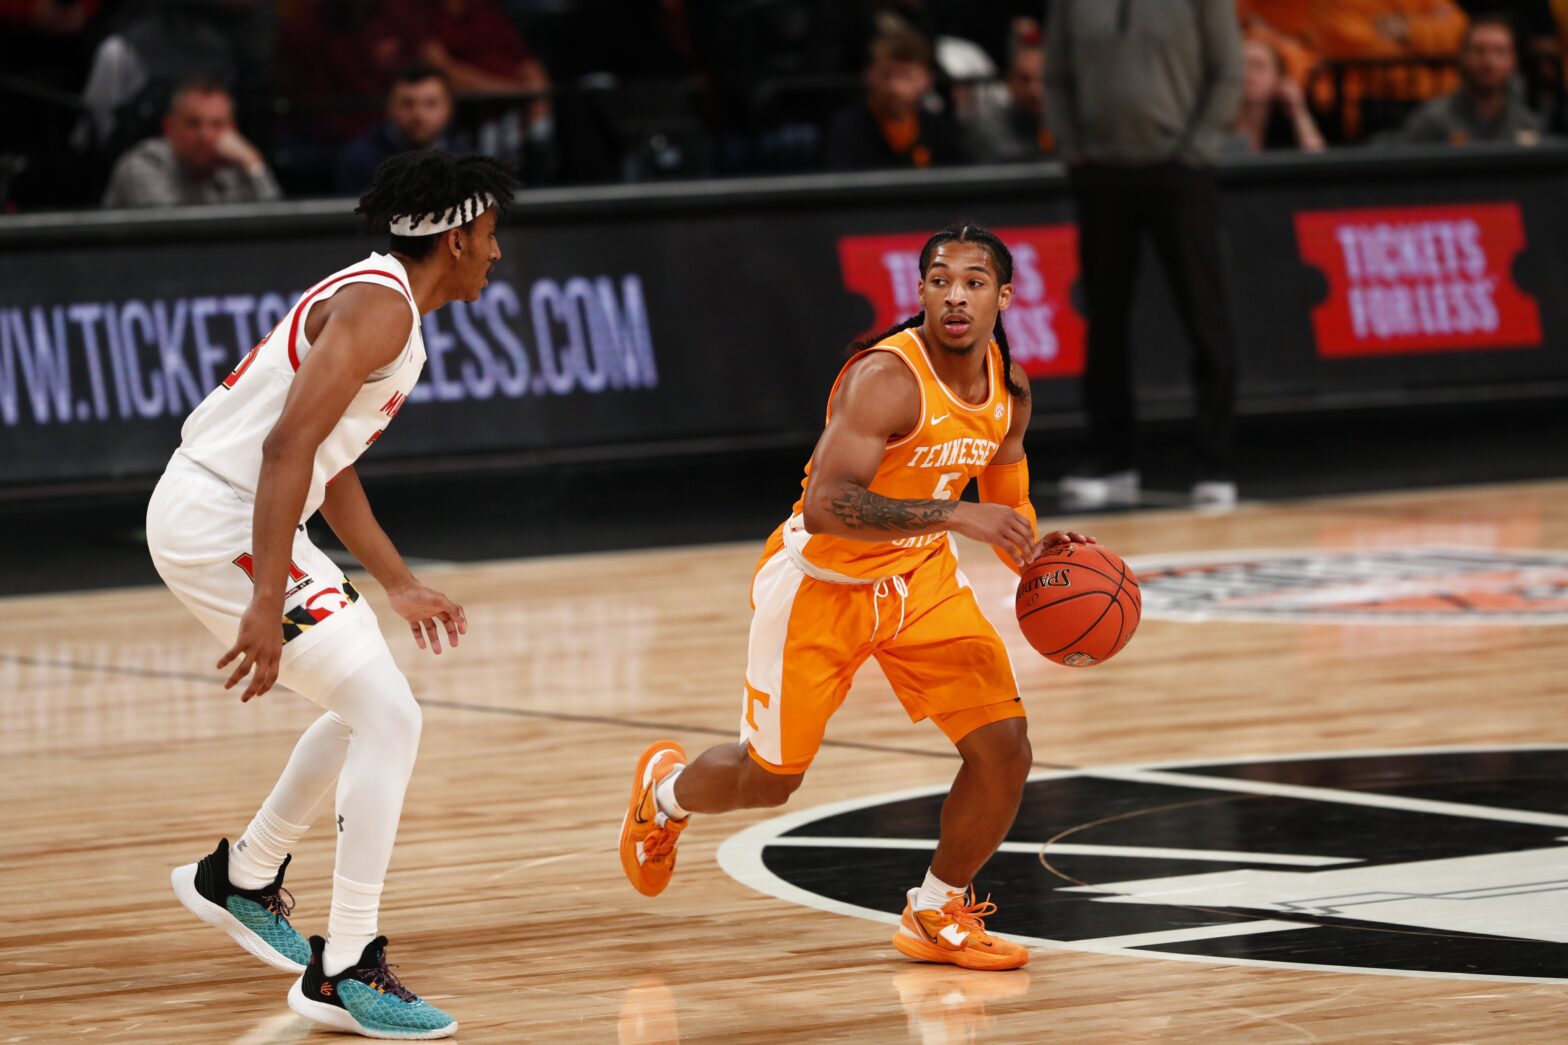 Zakai Ziegler hit many clutch shots down the stretch to led the No. 7 Tennessee Volunteers to victory over No. 13 Maryland basketball